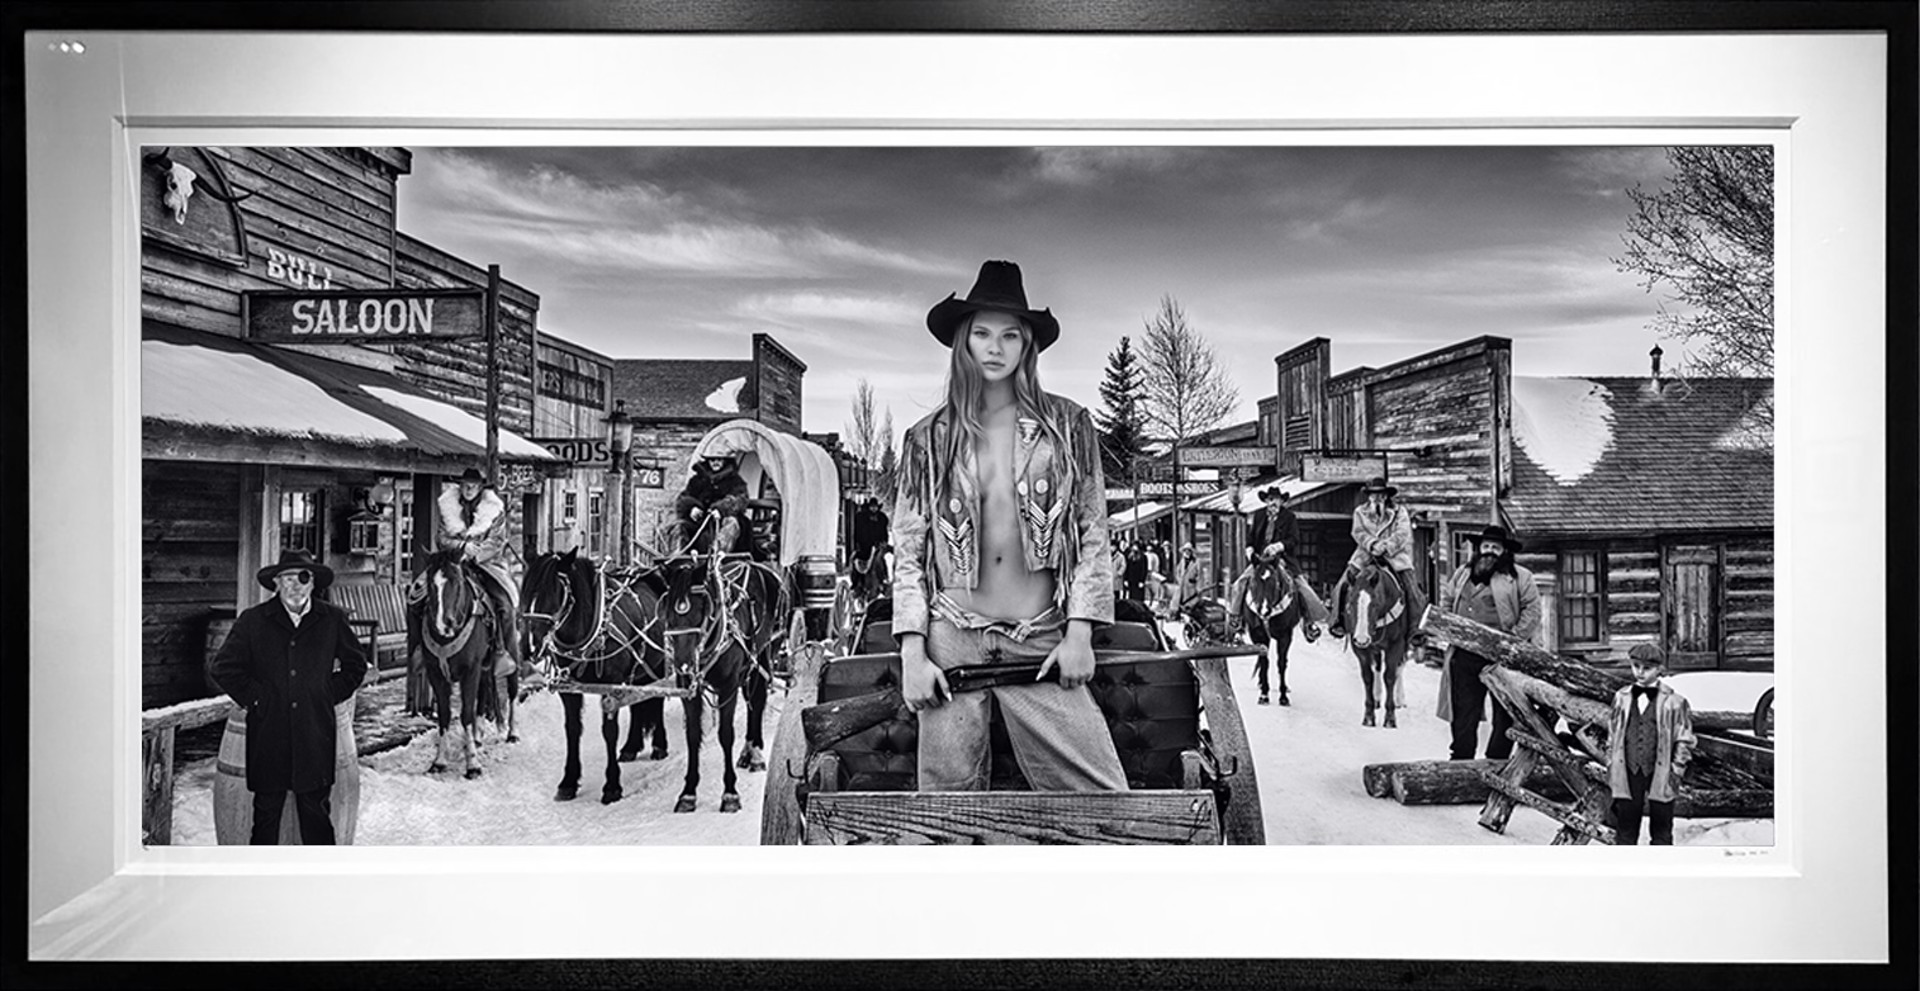 The Sheriff's Daughter by David Yarrow